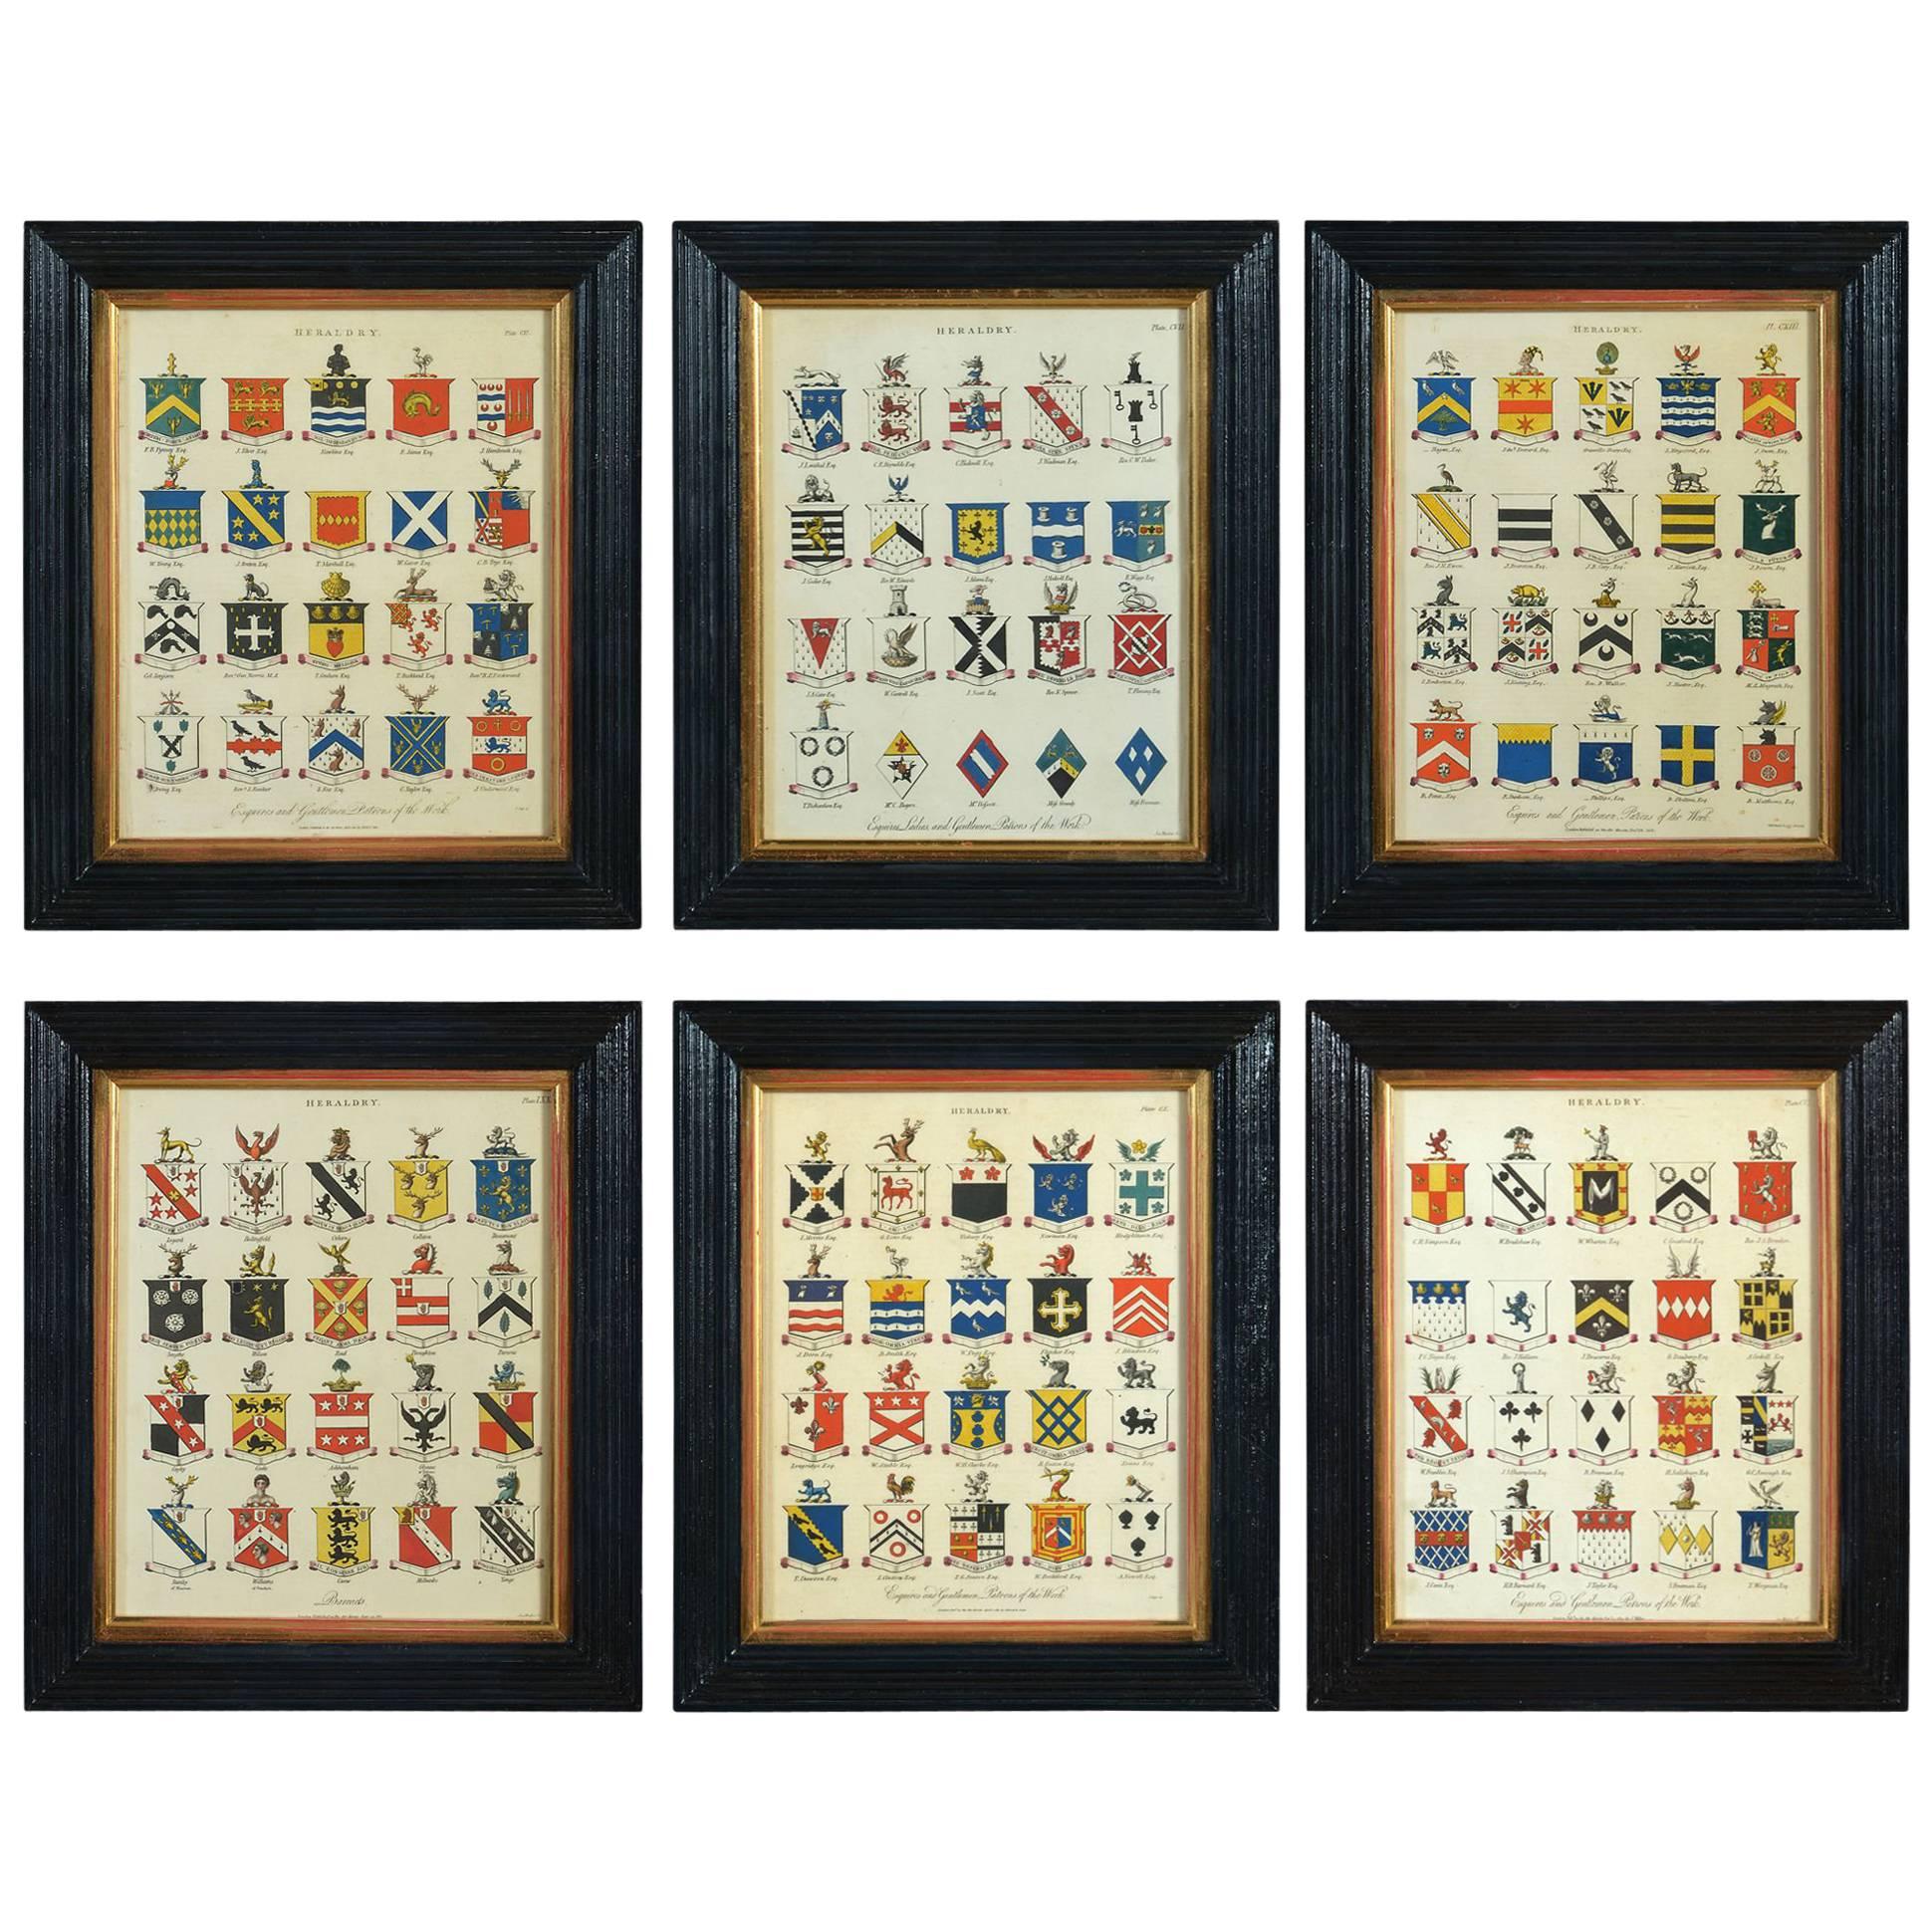 Hand Colored Heraldic Engravings Depicting the Arms of Esquires and Gentlemen